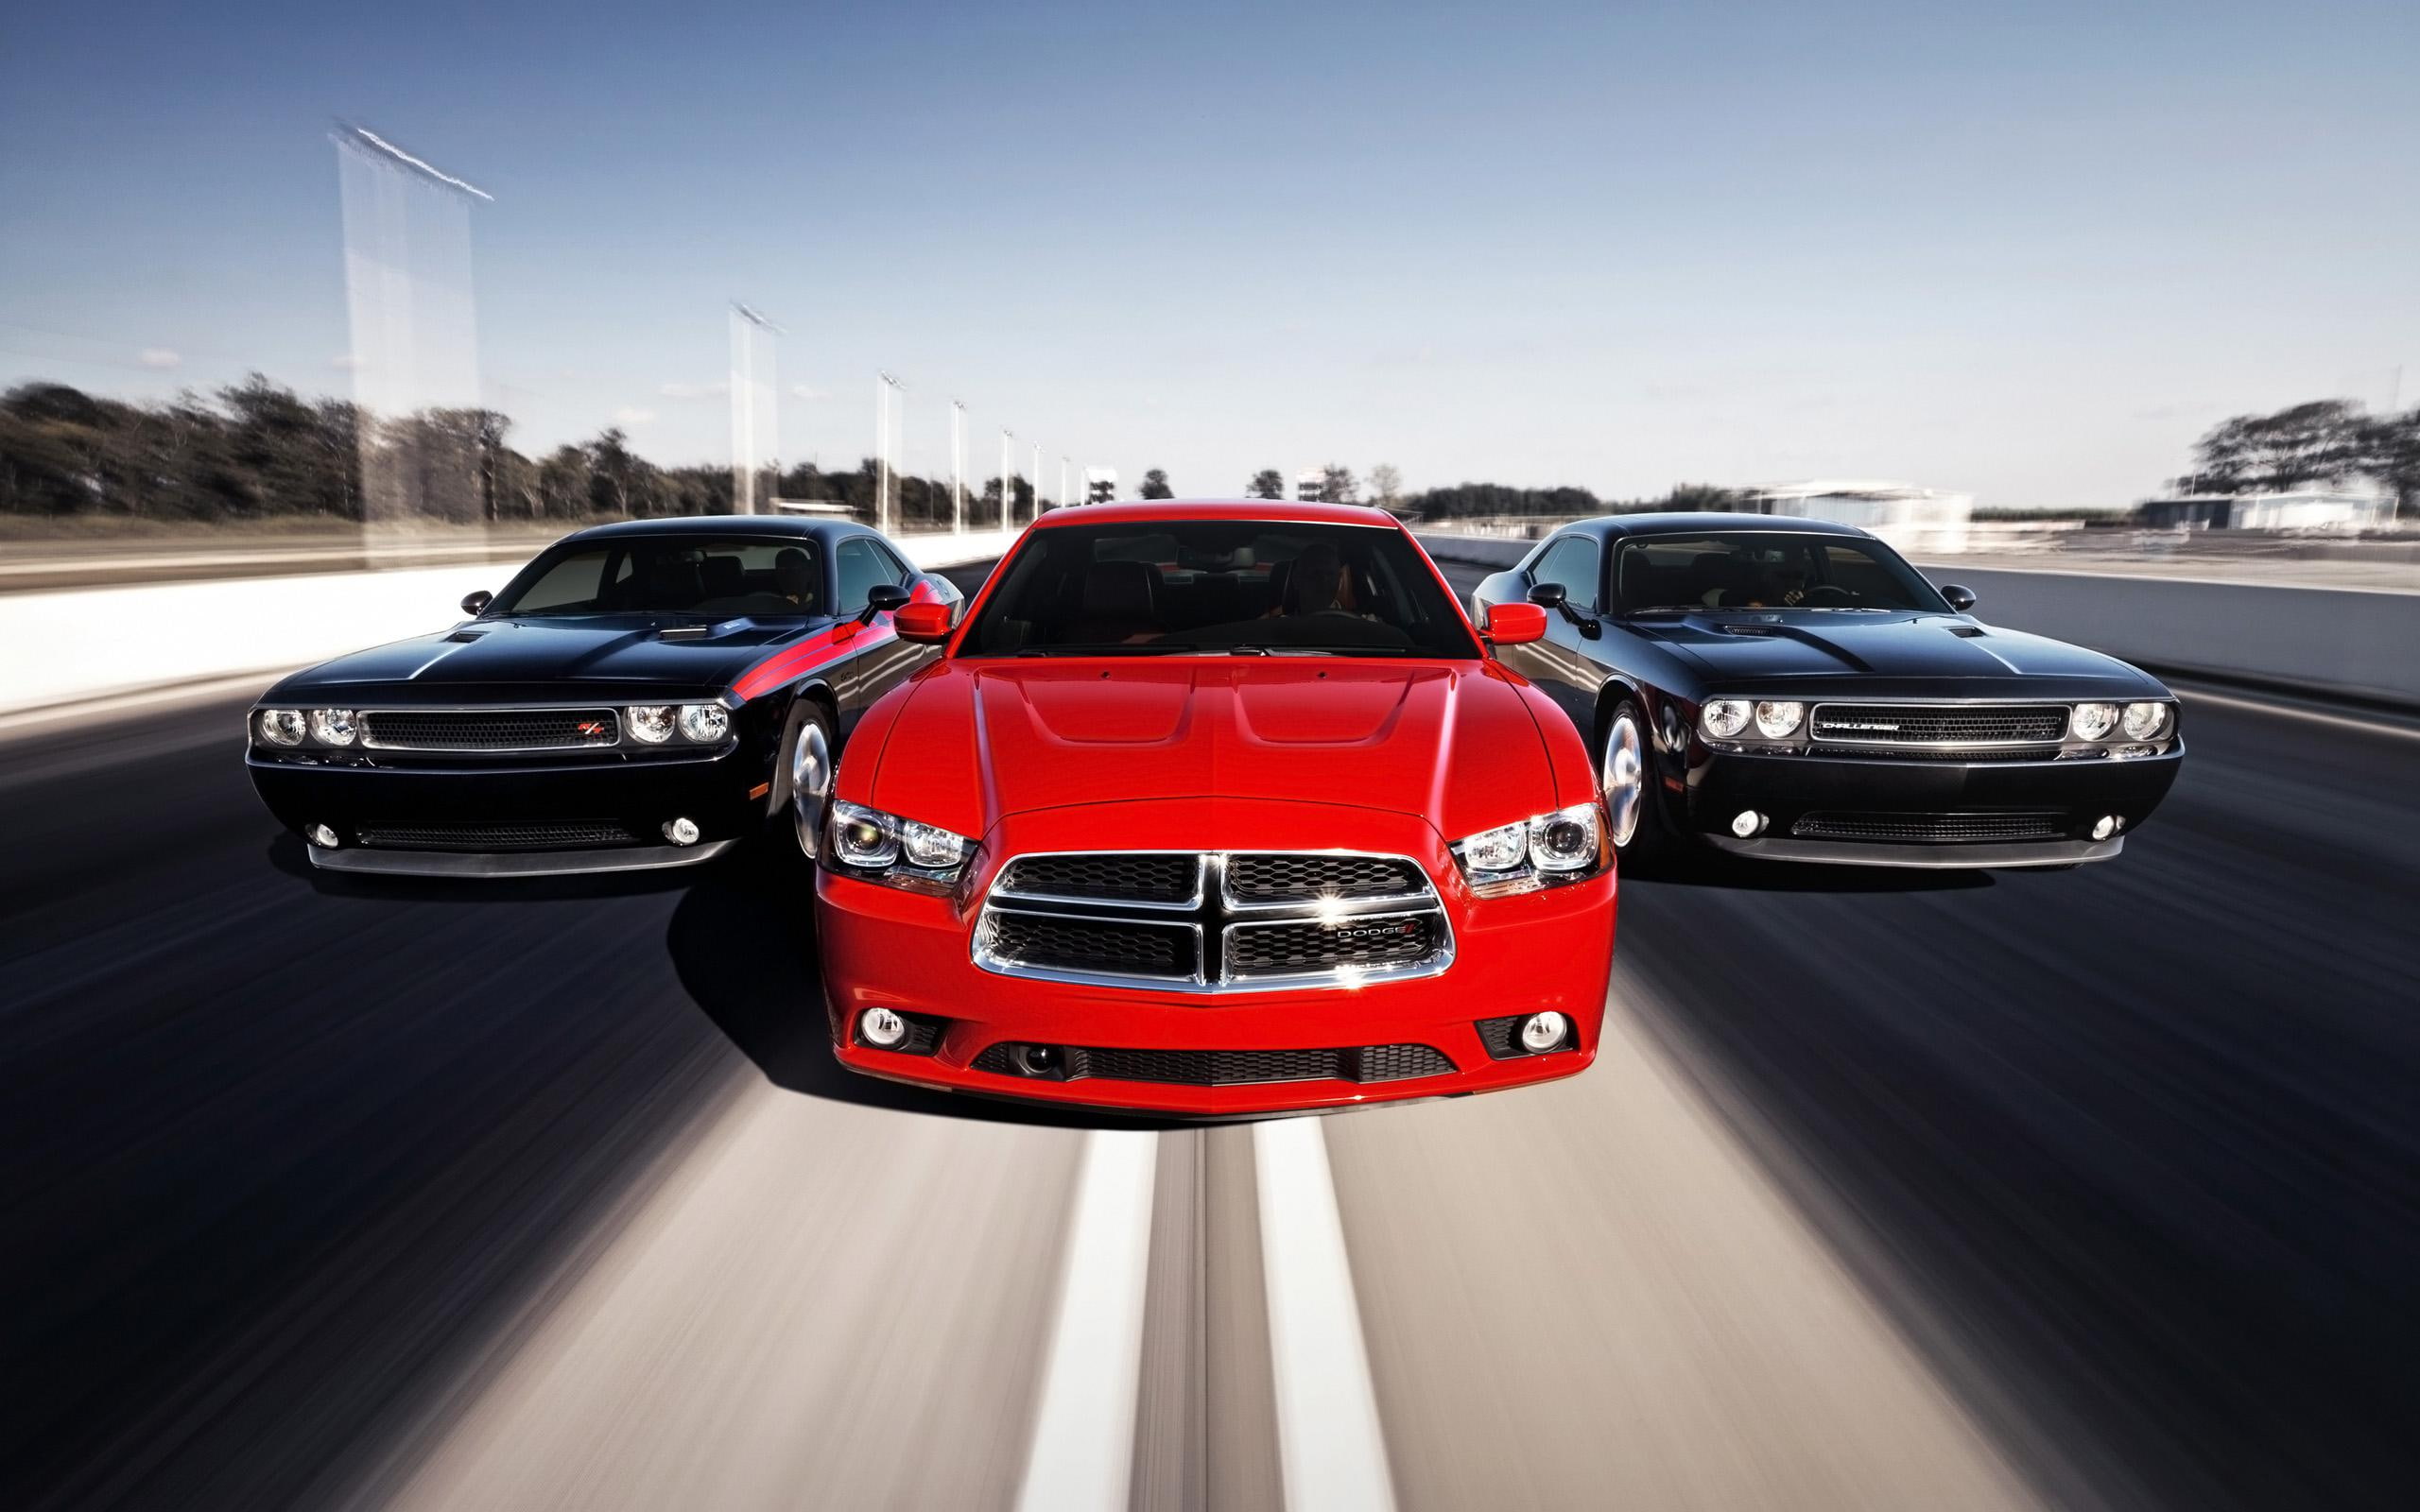 2014 Dodge Chargers, red dodge charger and 2 black dodge challengers